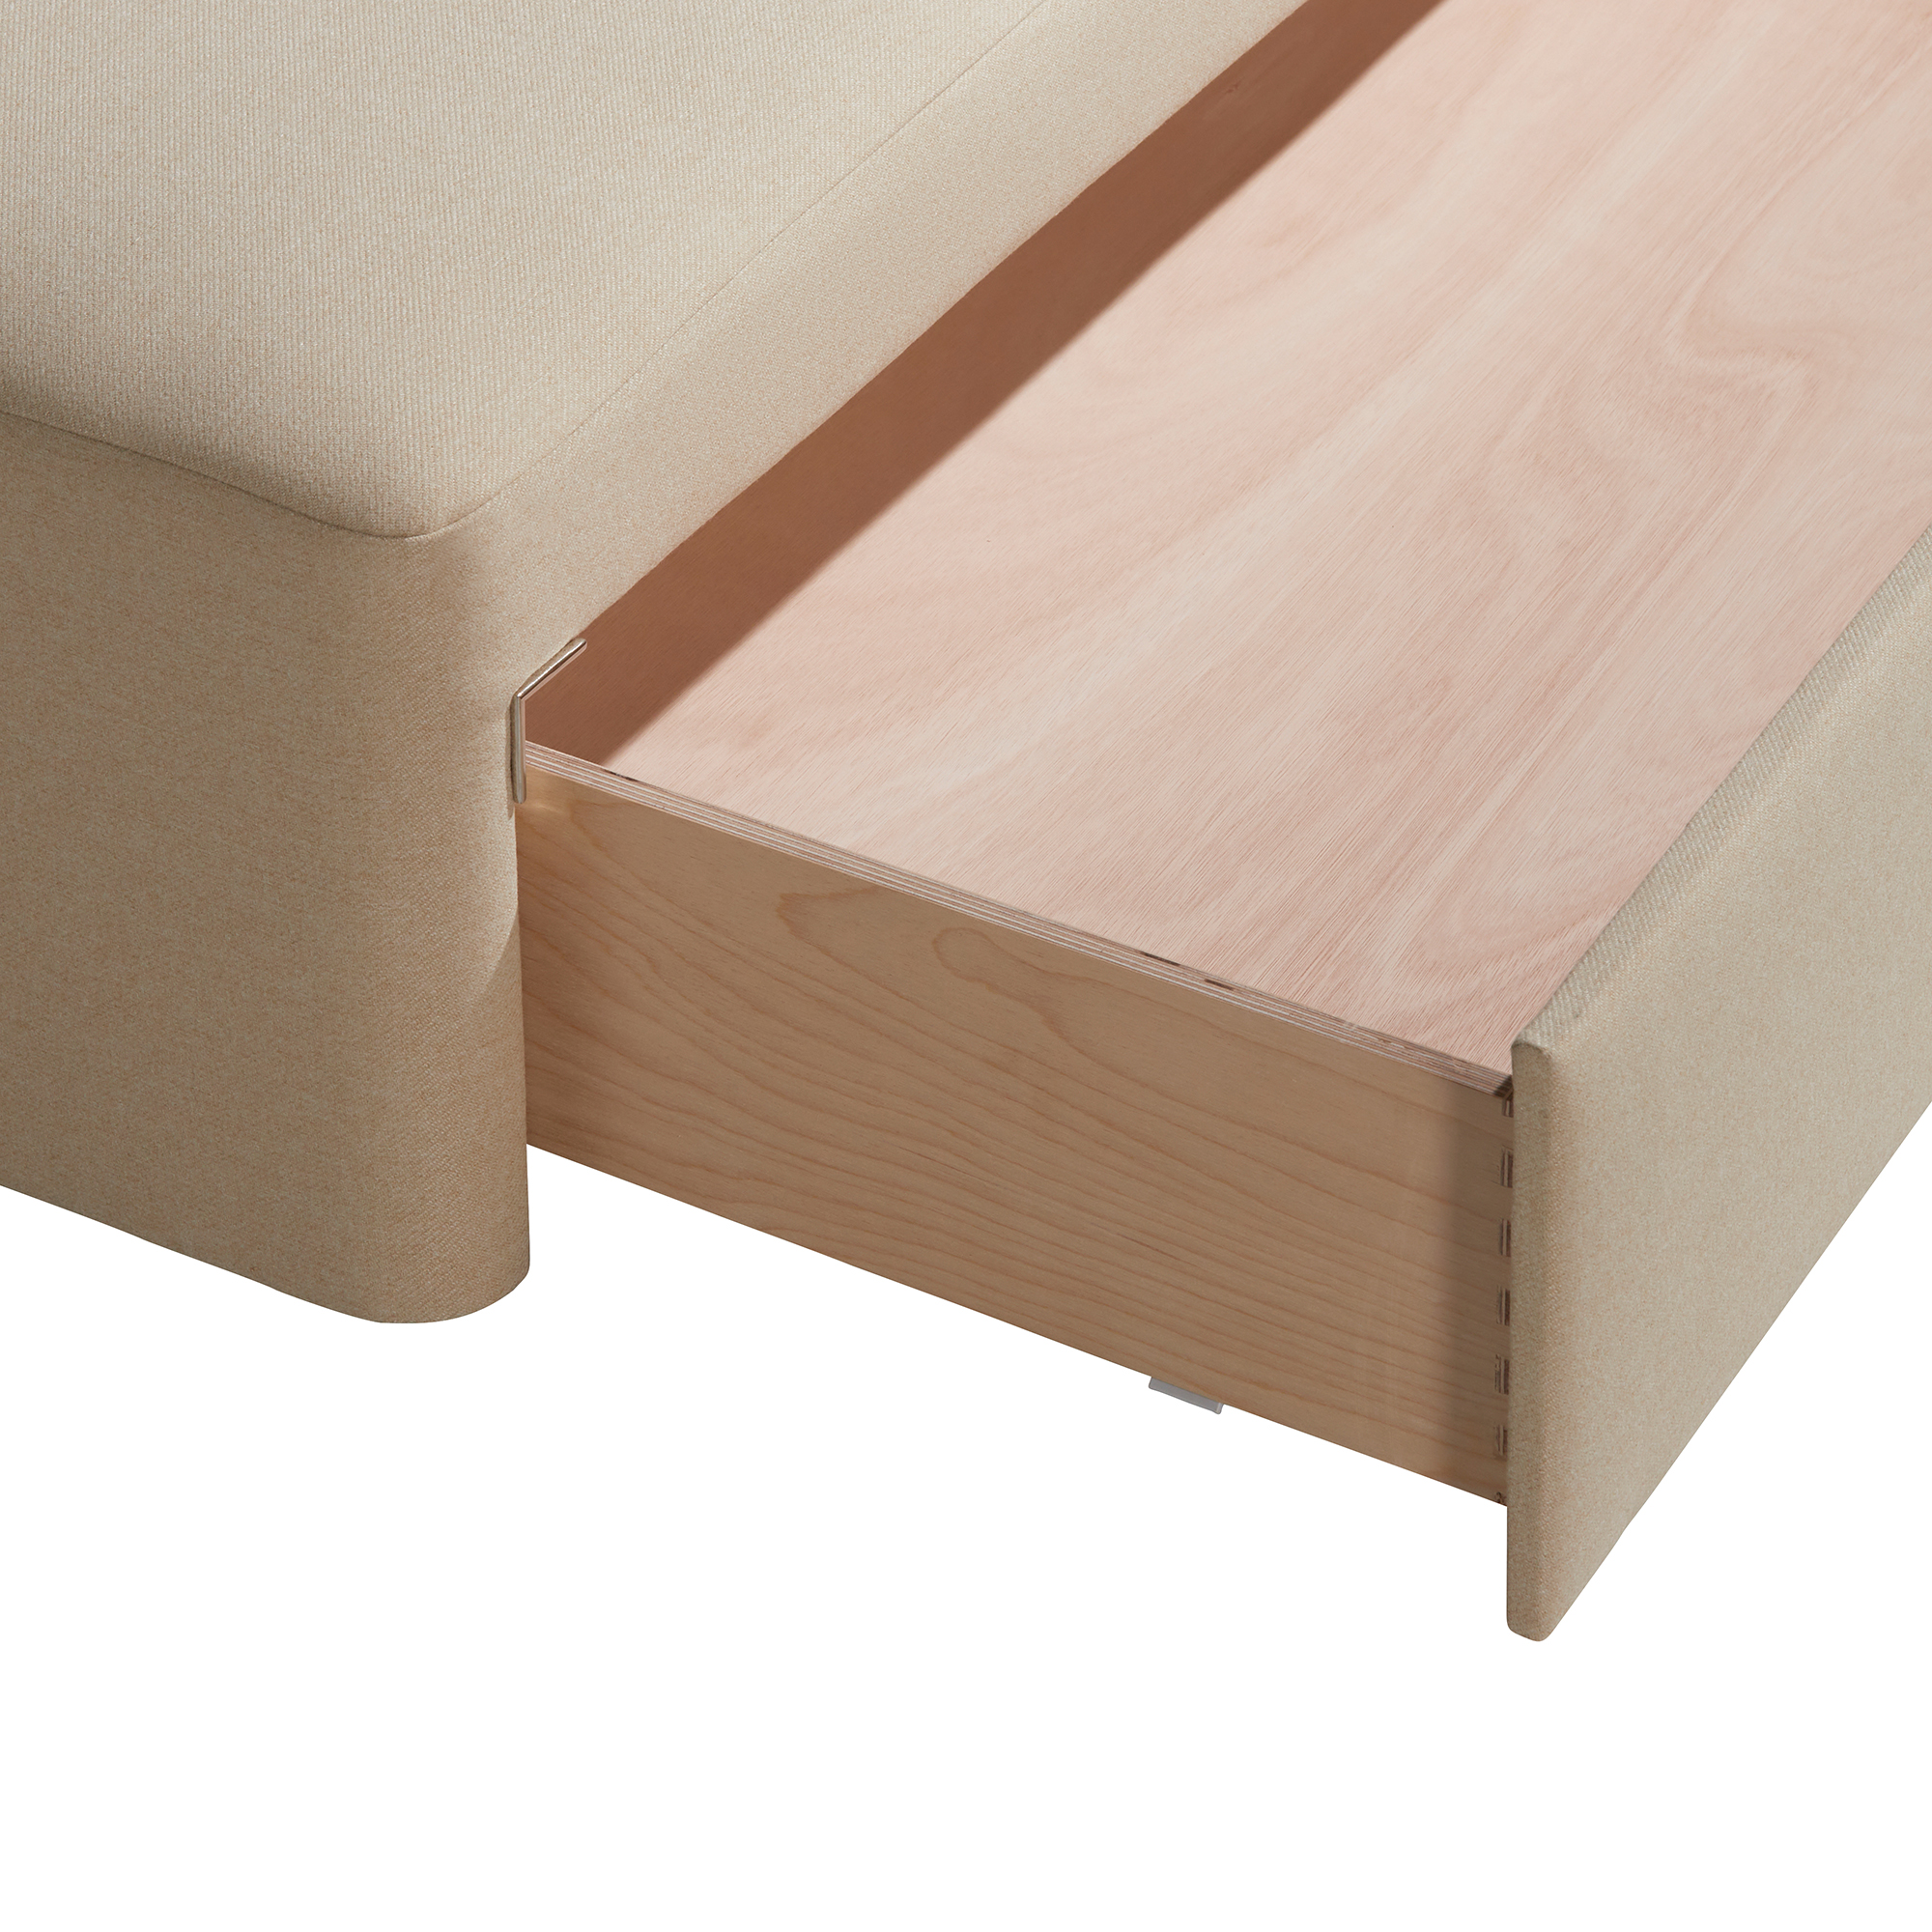 Dove Tail Ply Dove Tail Ply Footend Drawer | Barker & Stonehouse